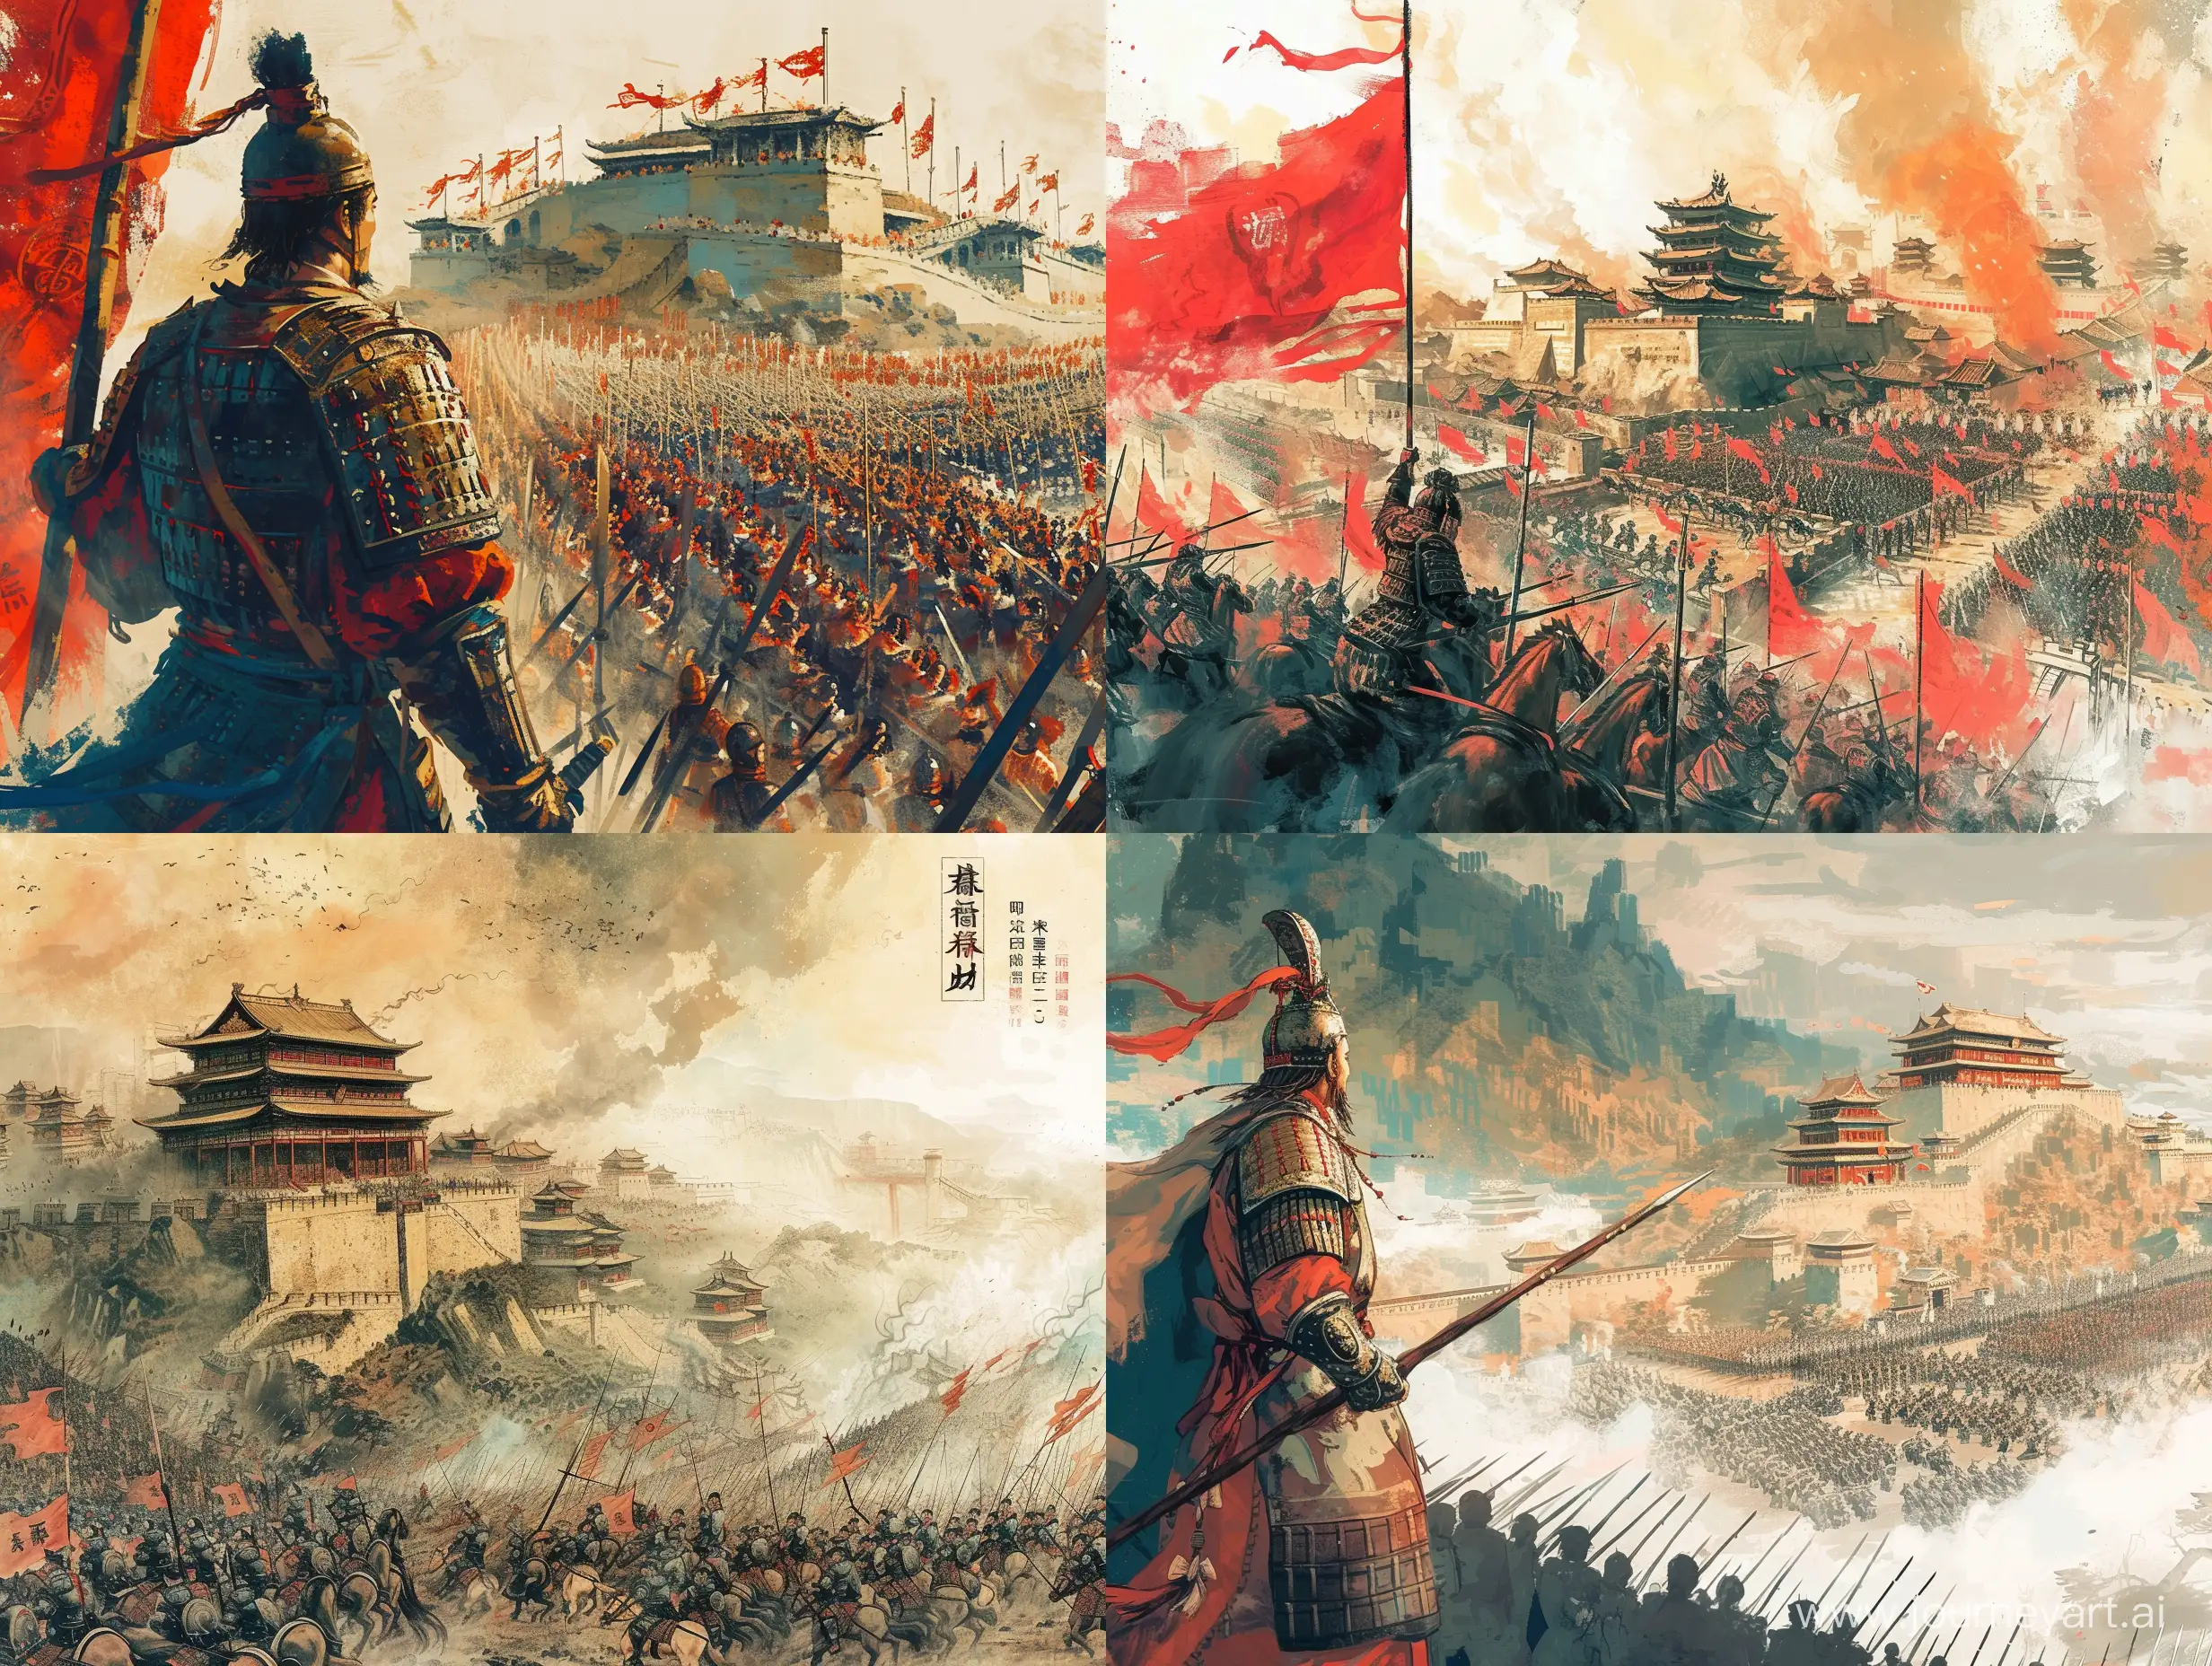 Strategic-Conquest-Majestic-Chinese-Army-in-Stunning-Ink-Painting-Style